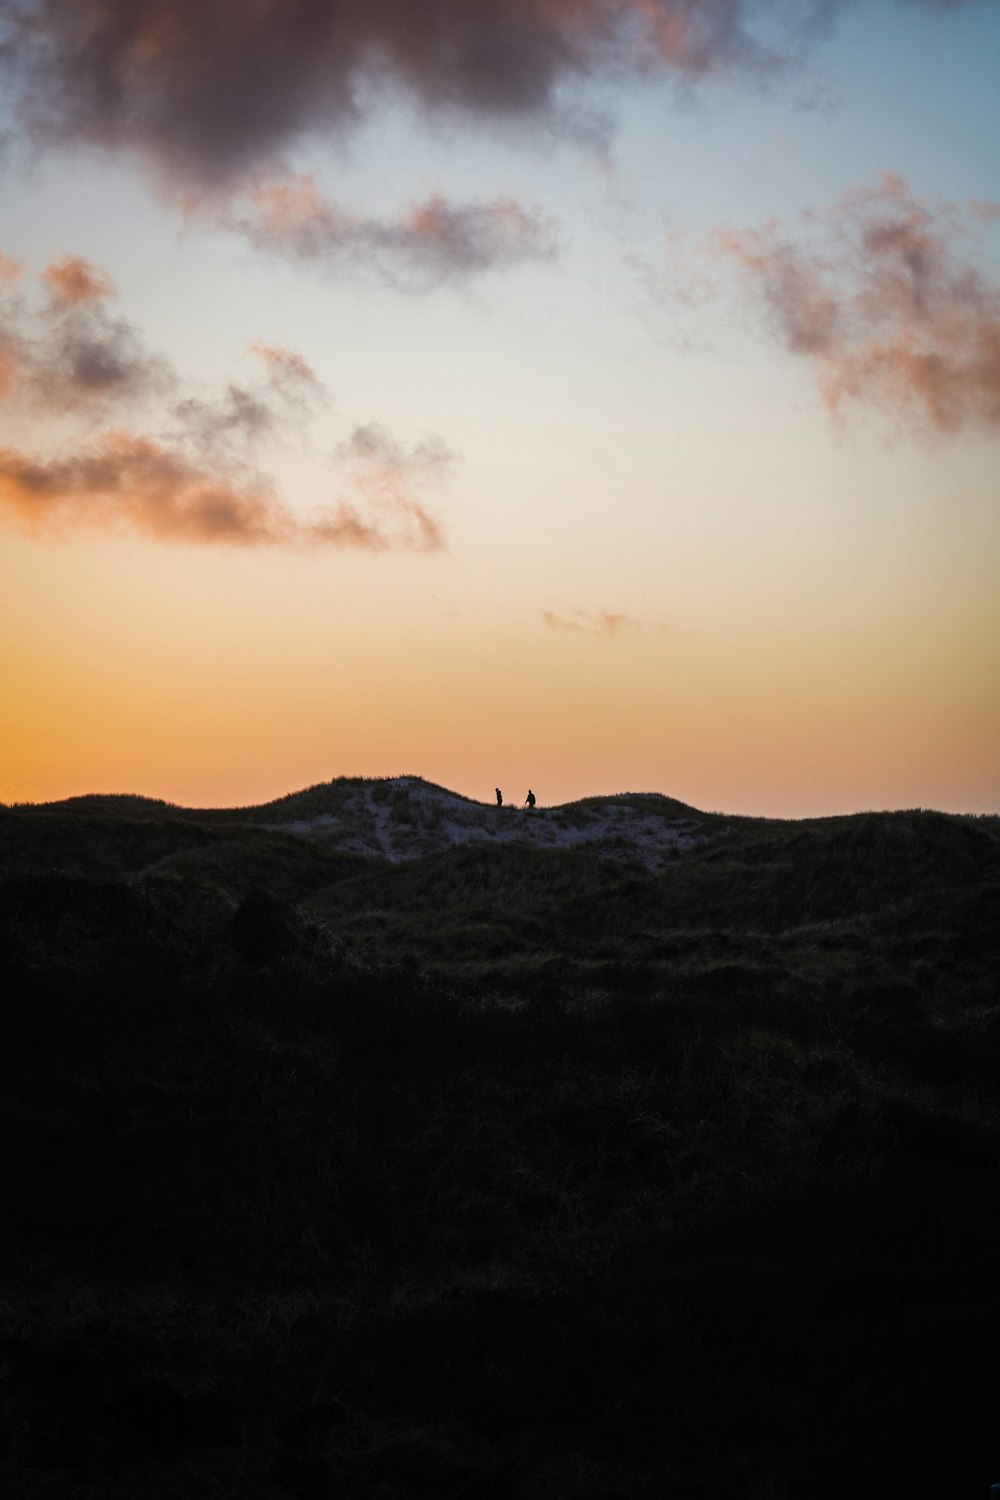 silhouette of person standing on top of mountain during sunset